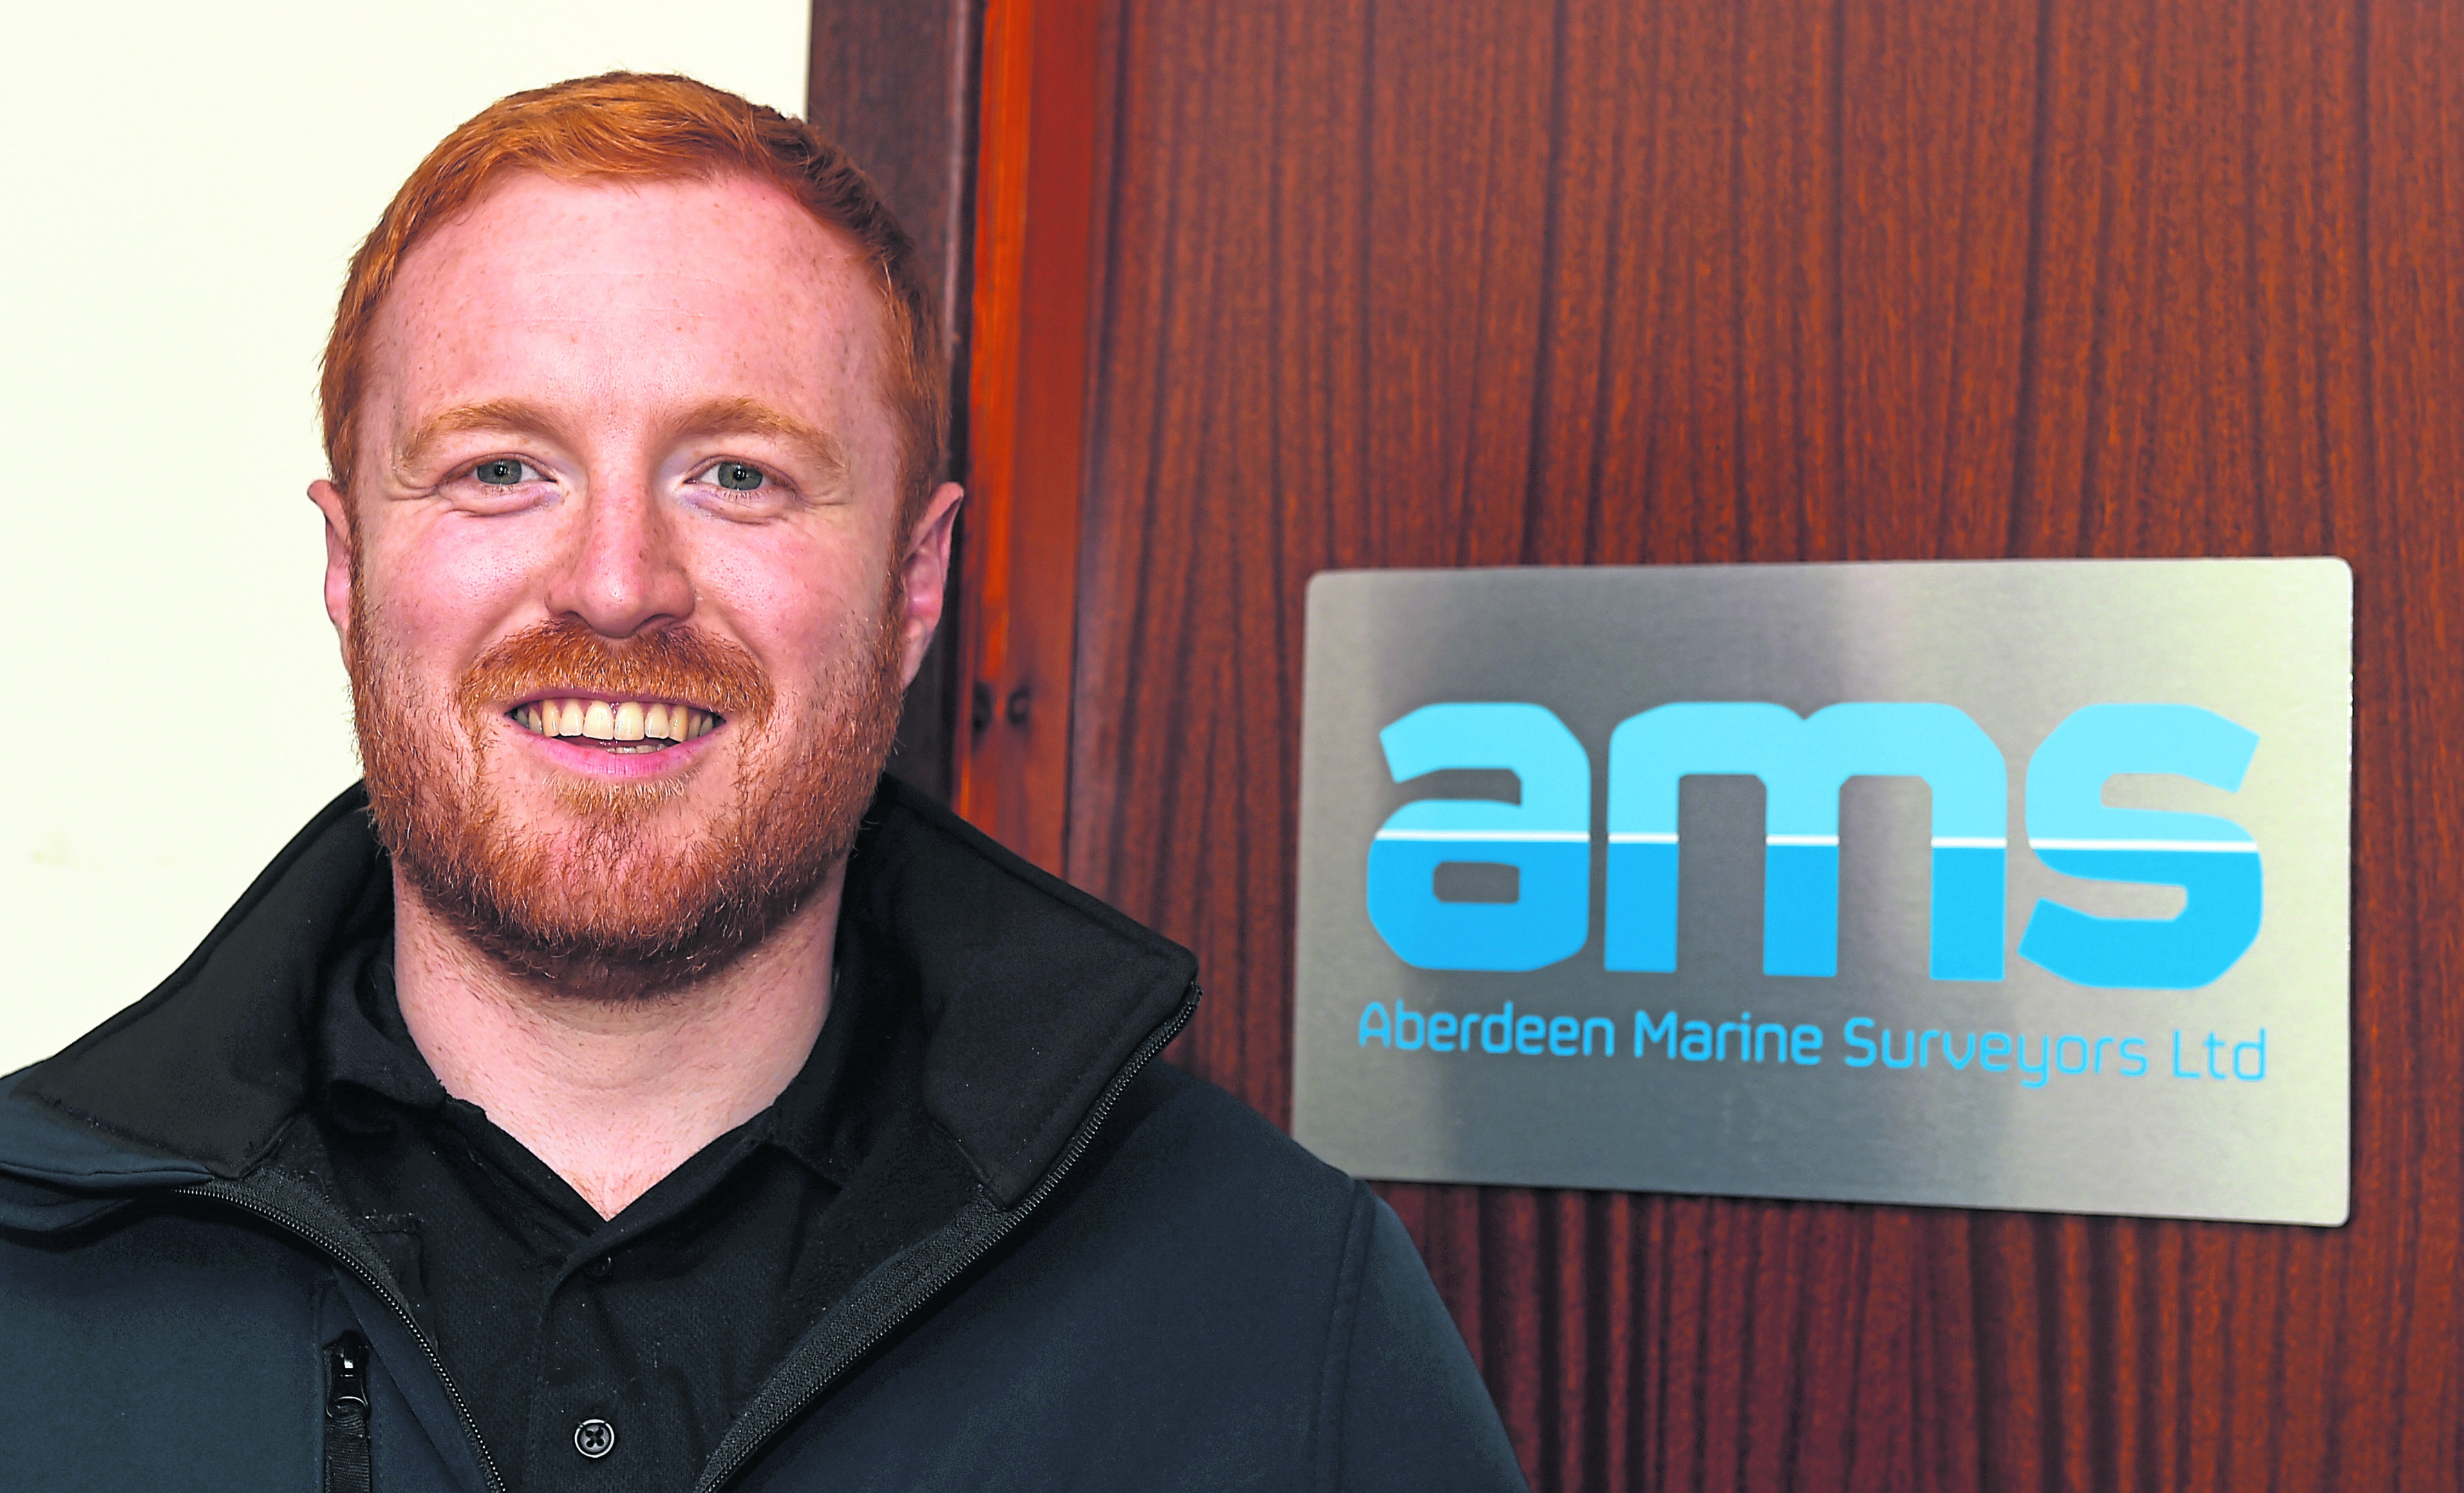 Neil Carr, director and co-founder of Aberdeen Marine Surveyors